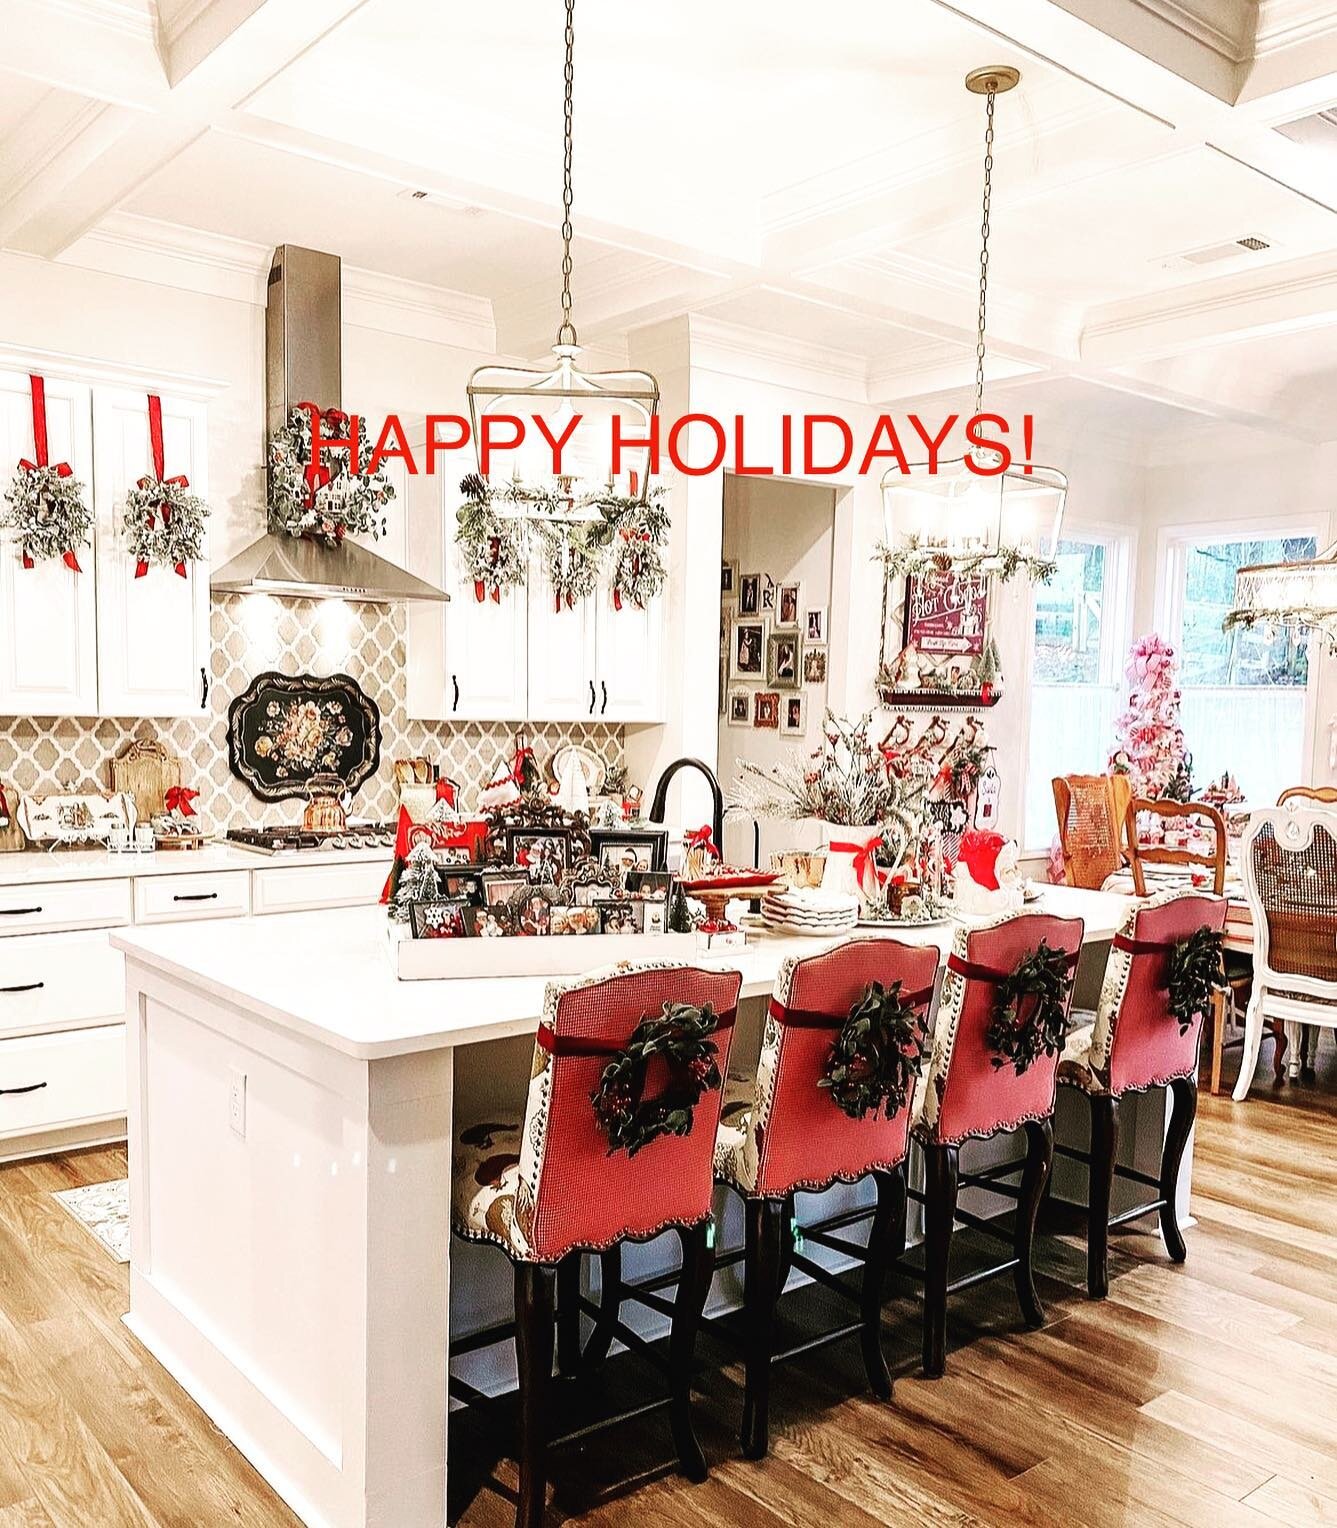 Wishing everyone a very happy holiday!! We are grateful for all of you and wish you the best in 2023. 
We will be closed the following days over the next week:
Fridays 12/23
Monday 12/26
Friday 12/30
Monday 1/2
Normal hours resume Tuesday January 3rd